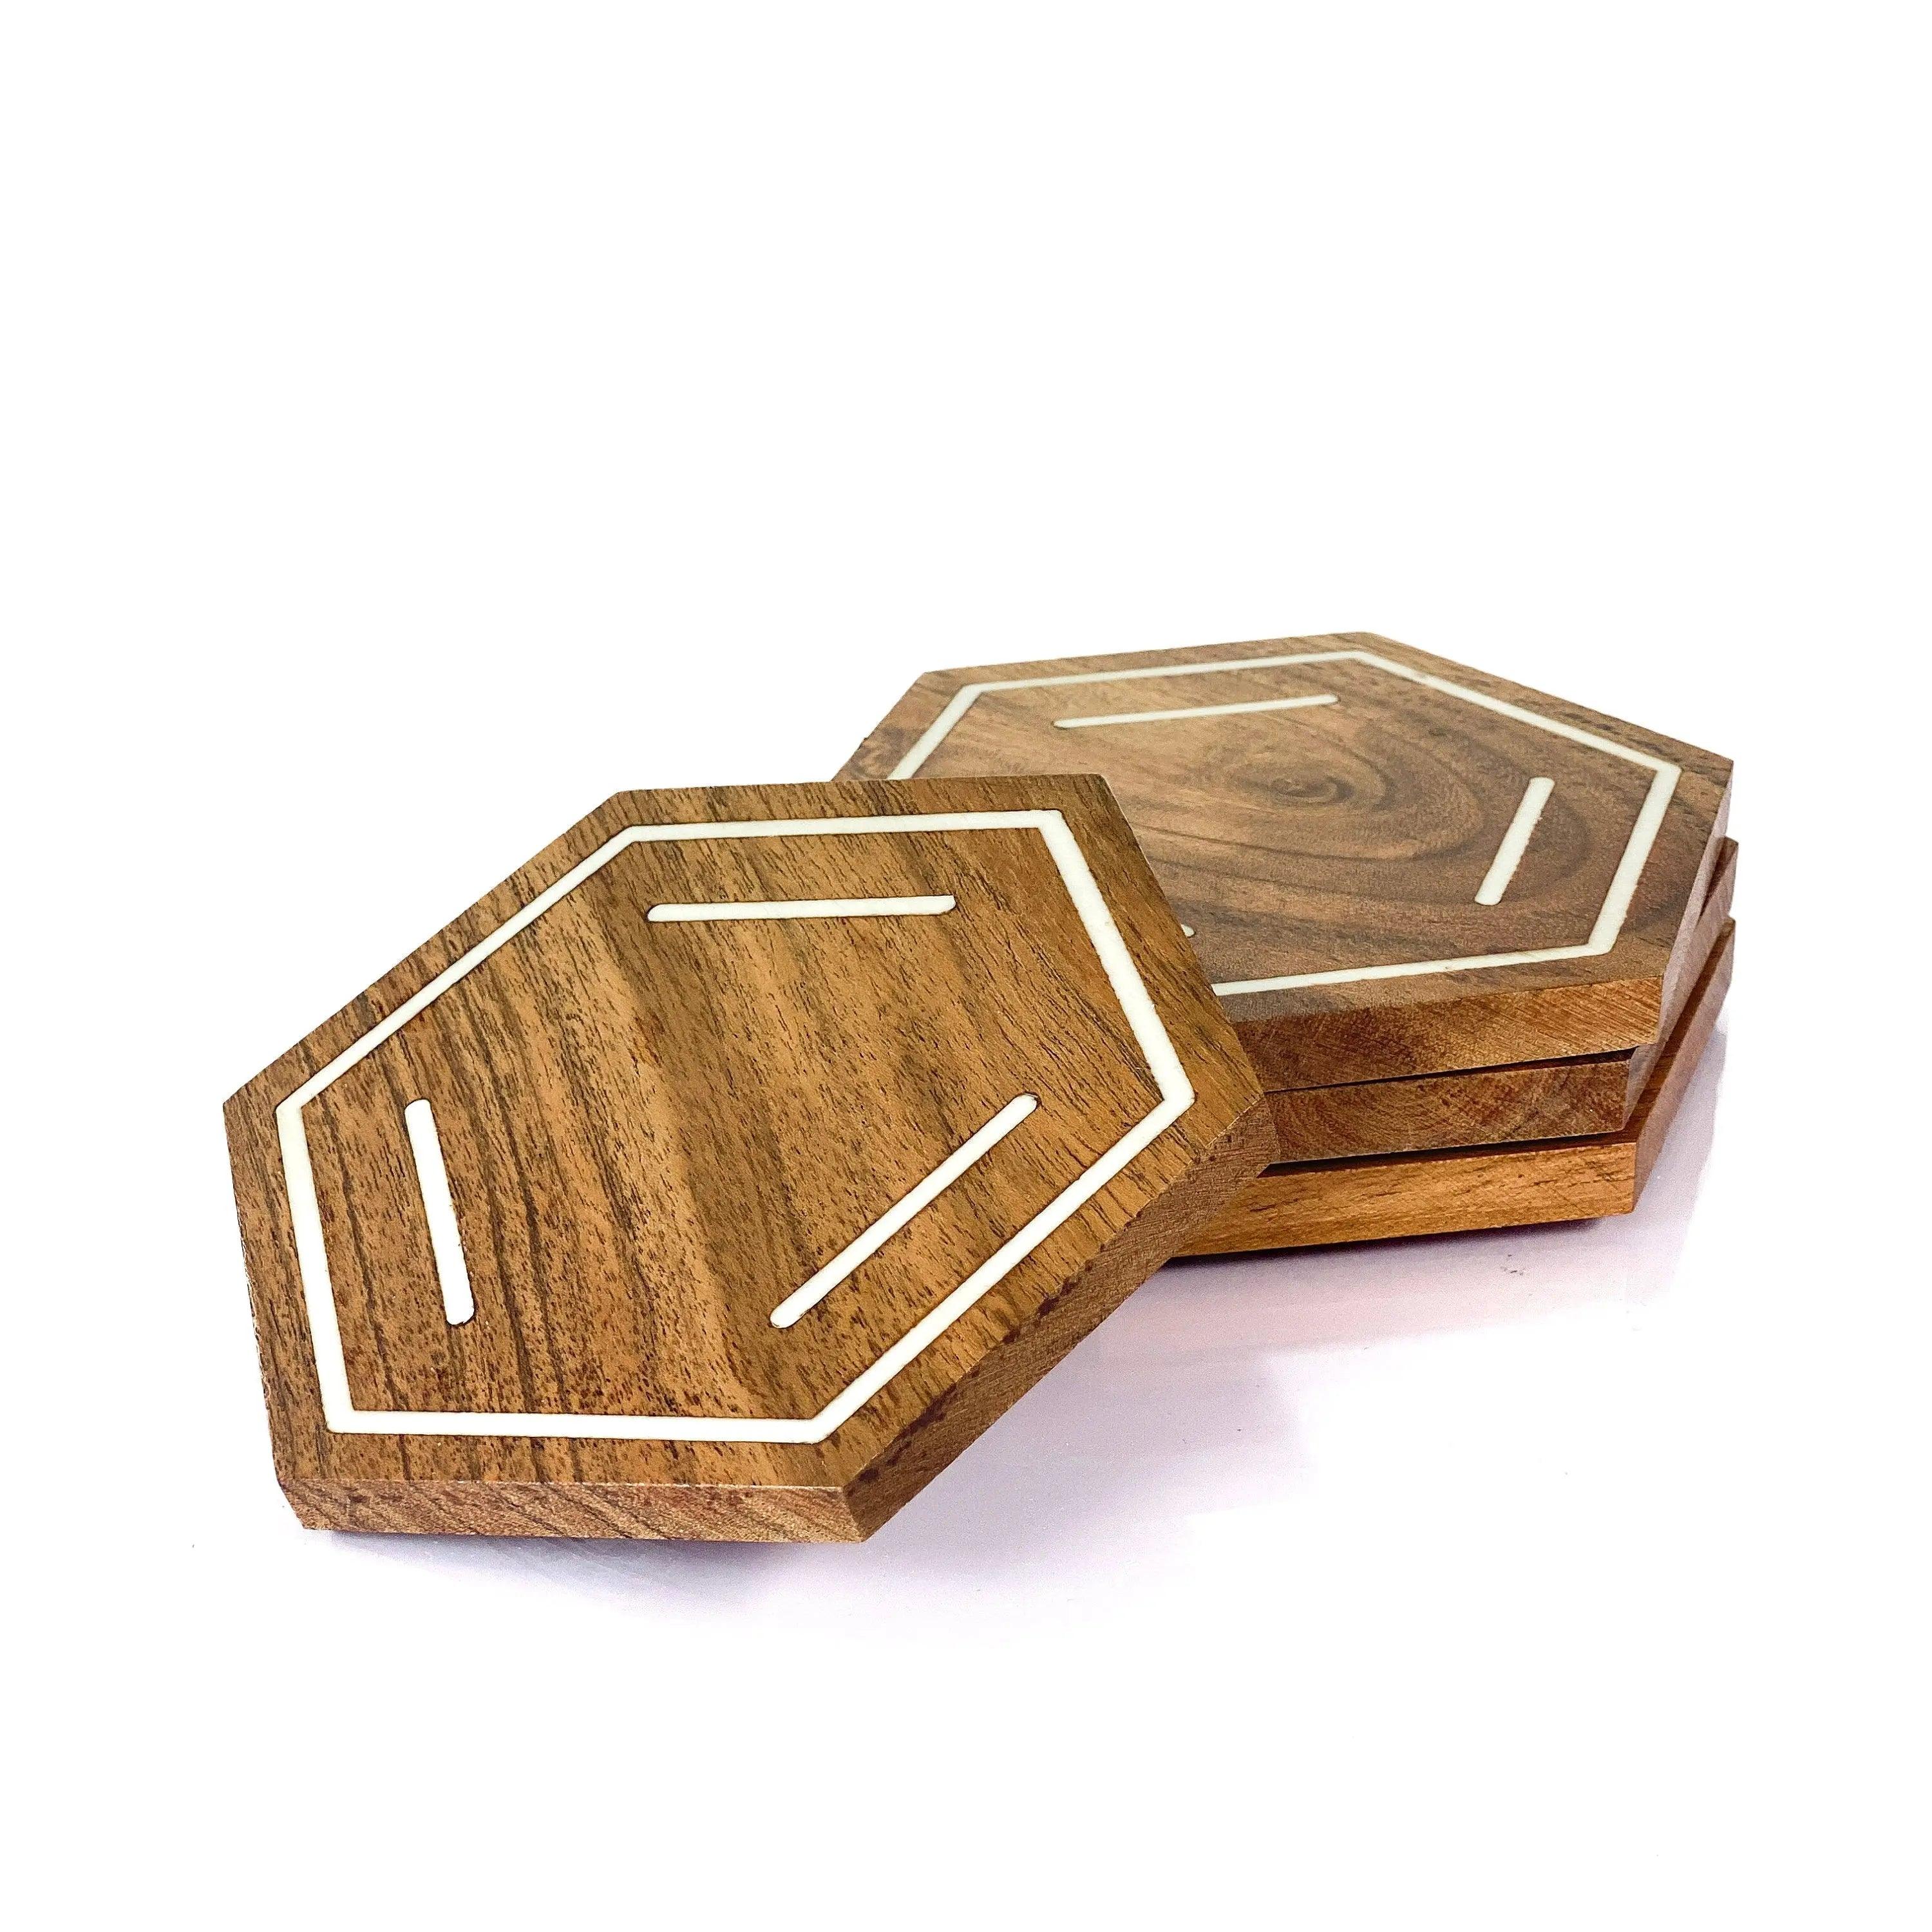 https://thecalculatedchemist.com/cdn/shop/files/Natural-Wood-and-Resin-Chemistry-Coaster-Set-of-4---Science-and-Chemistry-Gifts-thecalculatedchemist-1692753376407_6723264d-cdb3-47bf-8116-ff1fc2539139.jpg?v=1692753424